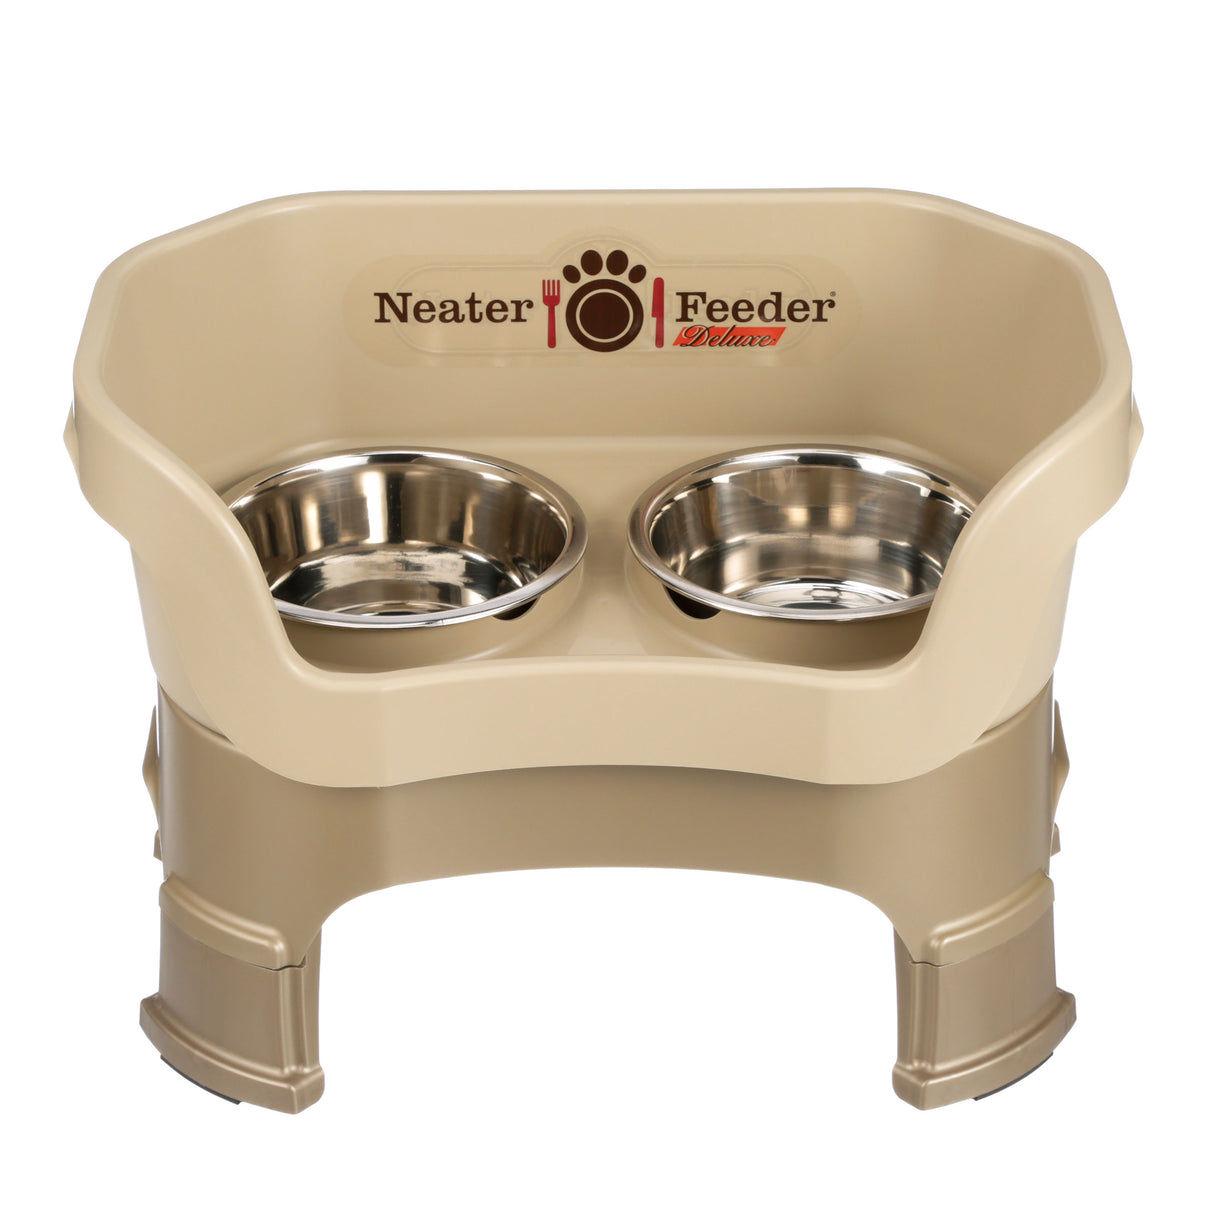 Deluxe medium Neater Feeder in Cappuccino with leg extensions